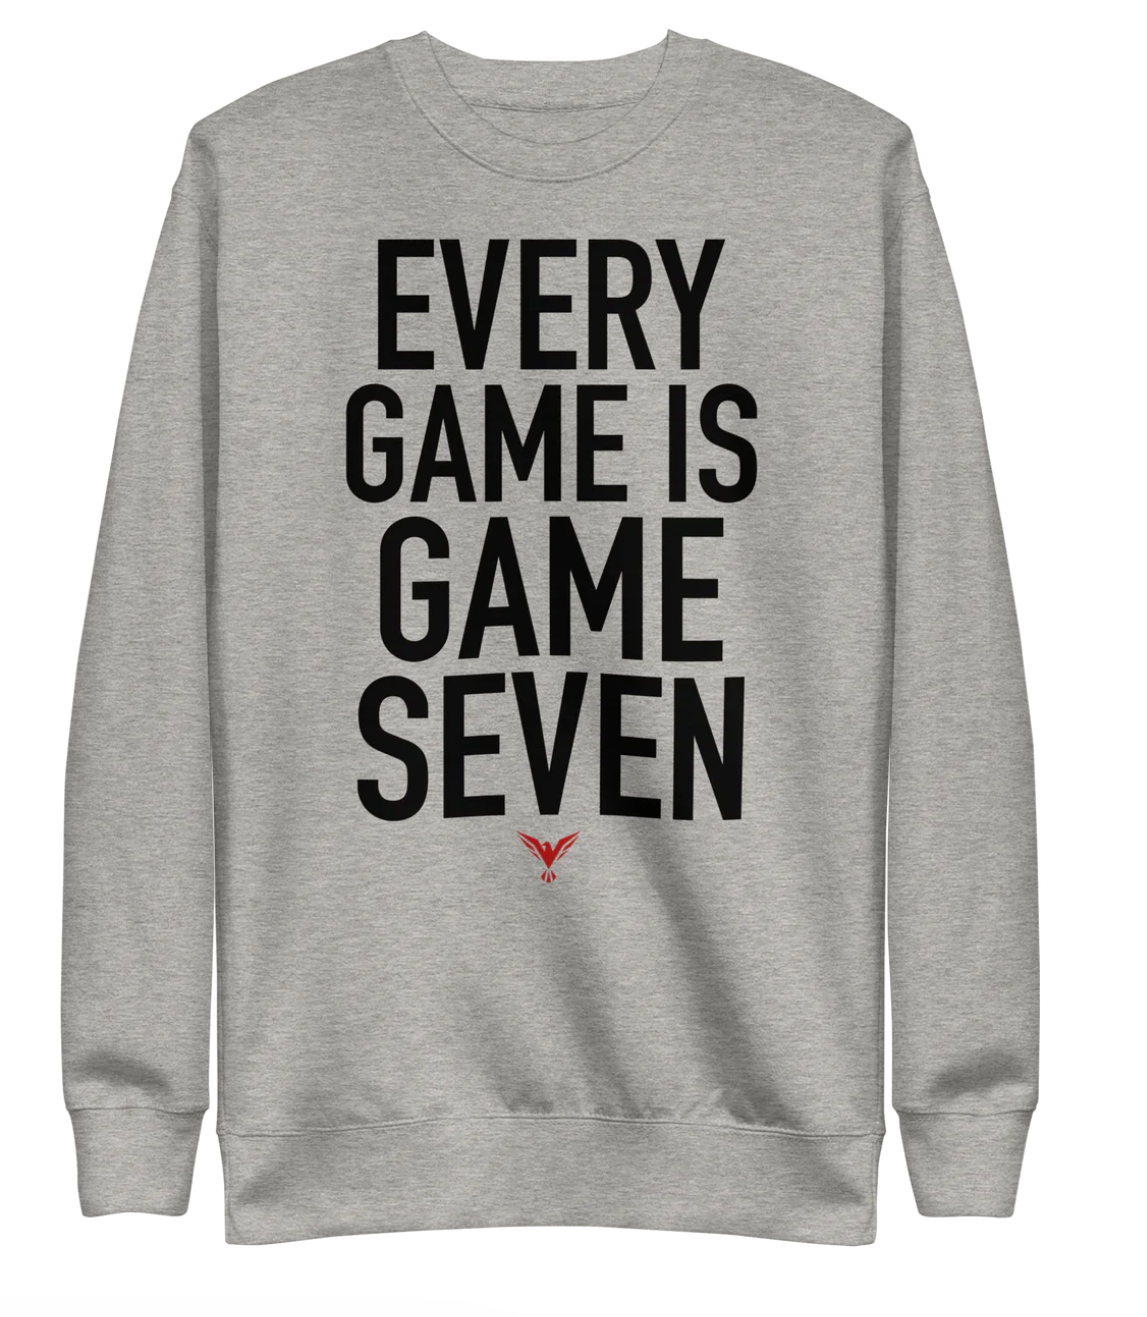 Every Game Is Game Seven Crewneck